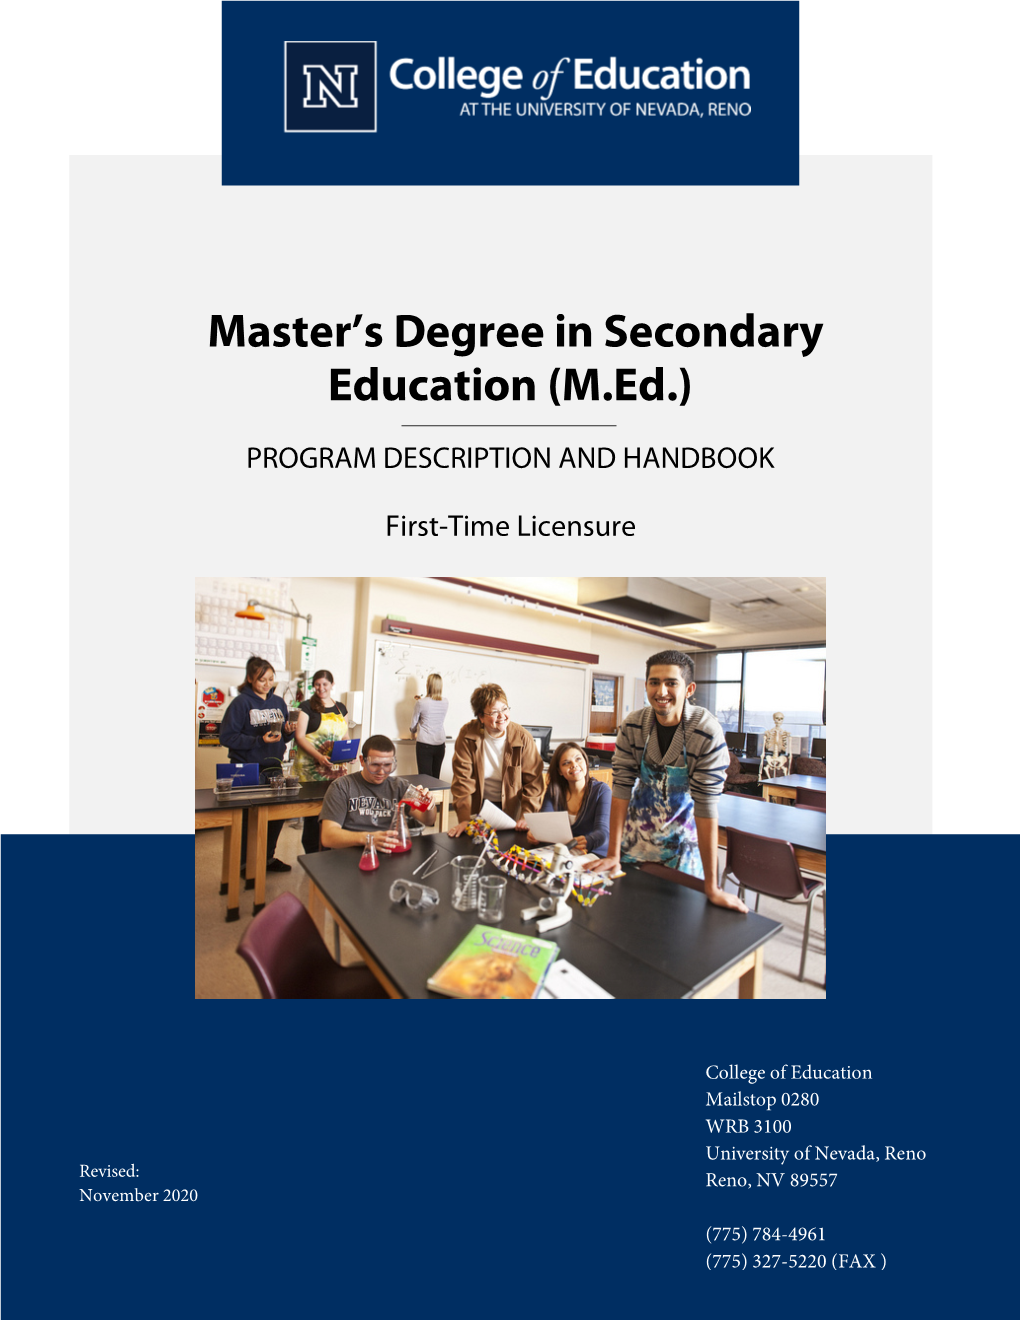 Masters Degree in Secondary Education (M.Ed.)